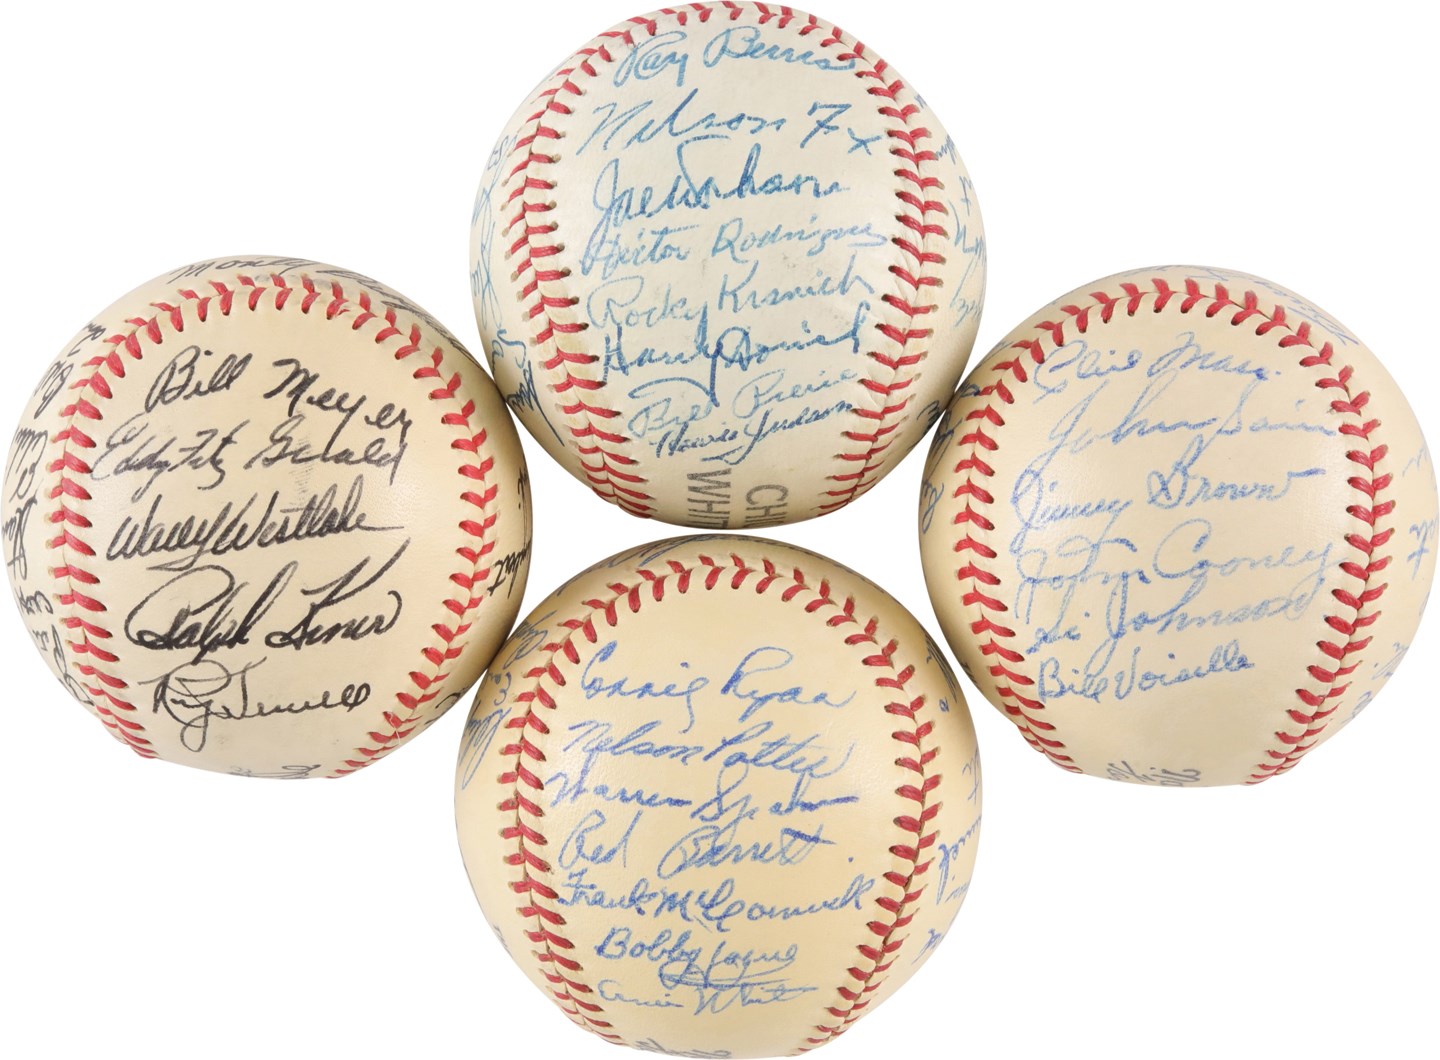 Baseball Autographs - High Grade Team-Signed Ball Collection - 1948 and 1949 Braves, 1949 Pirates & 1952 White Sox (4)